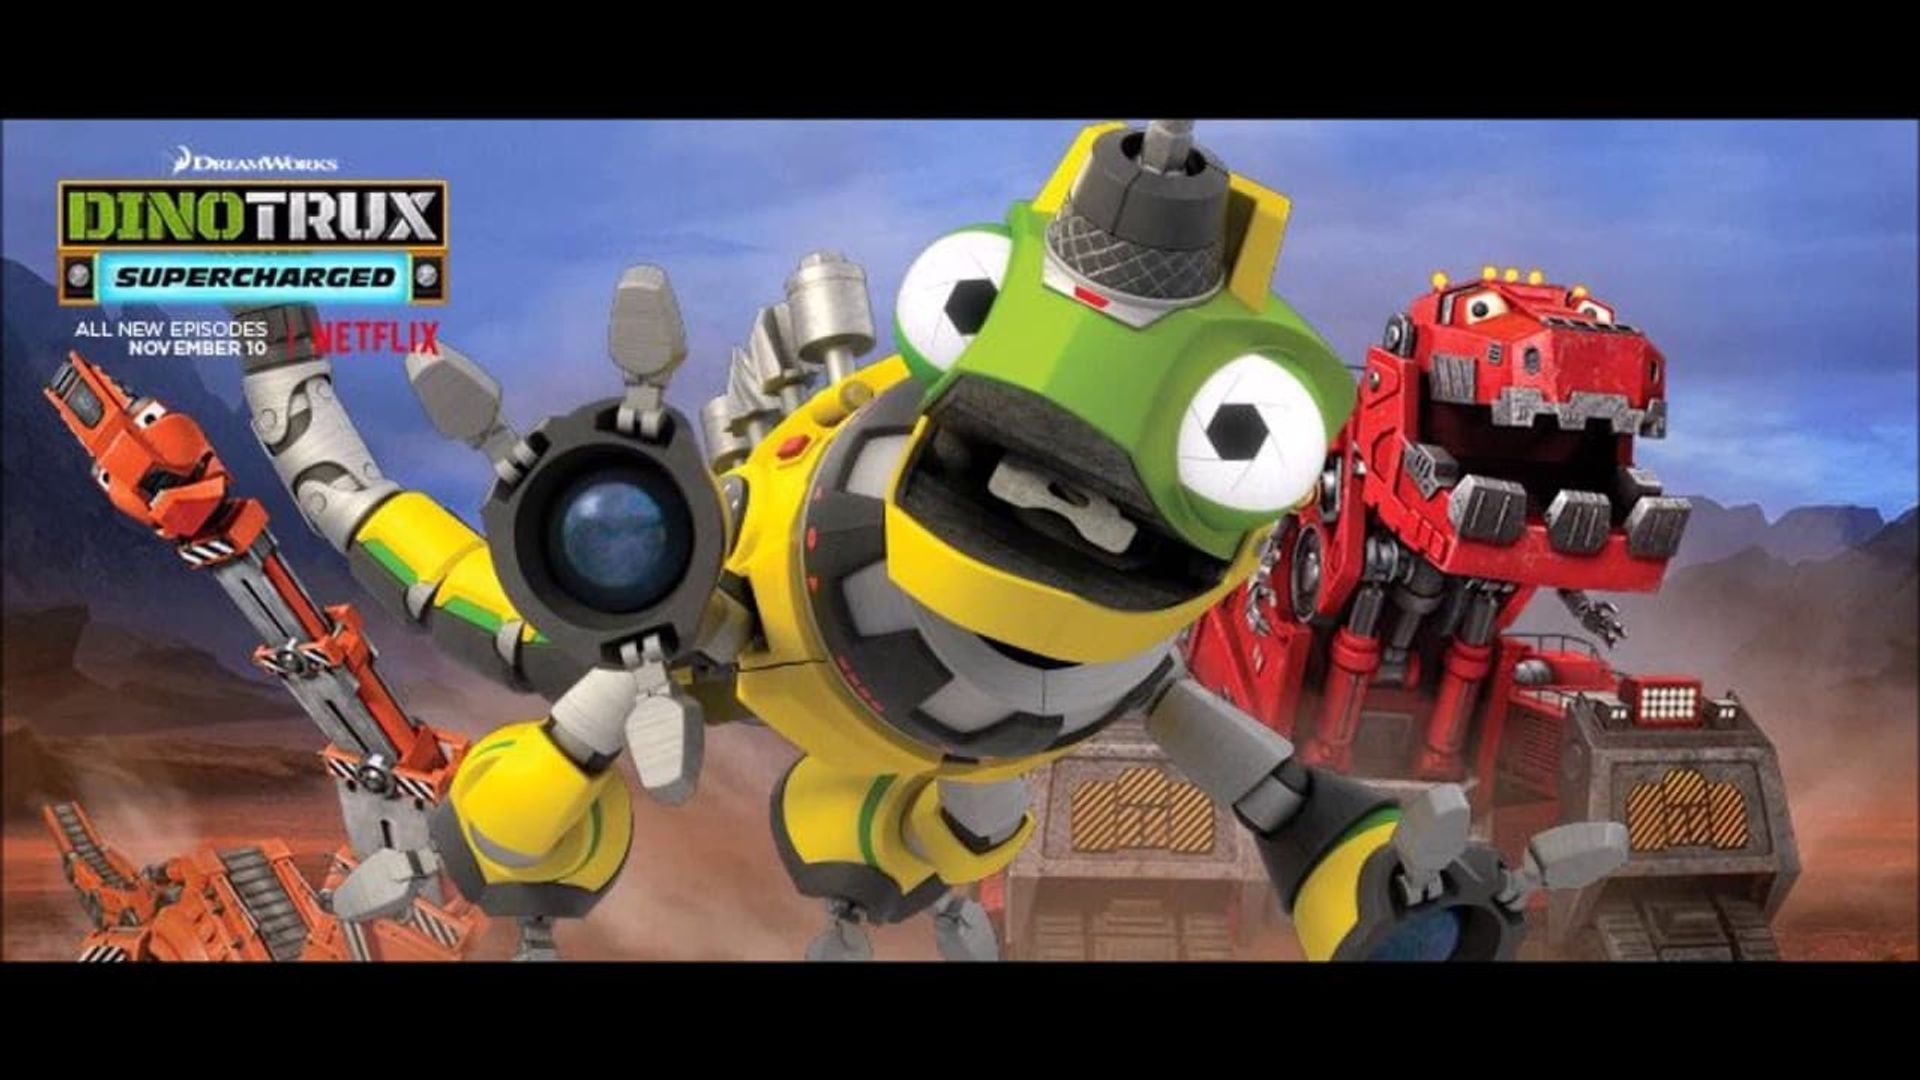 Dinotrux: Supercharged Episodes on Netflix, fuboTV, and Streaming Online